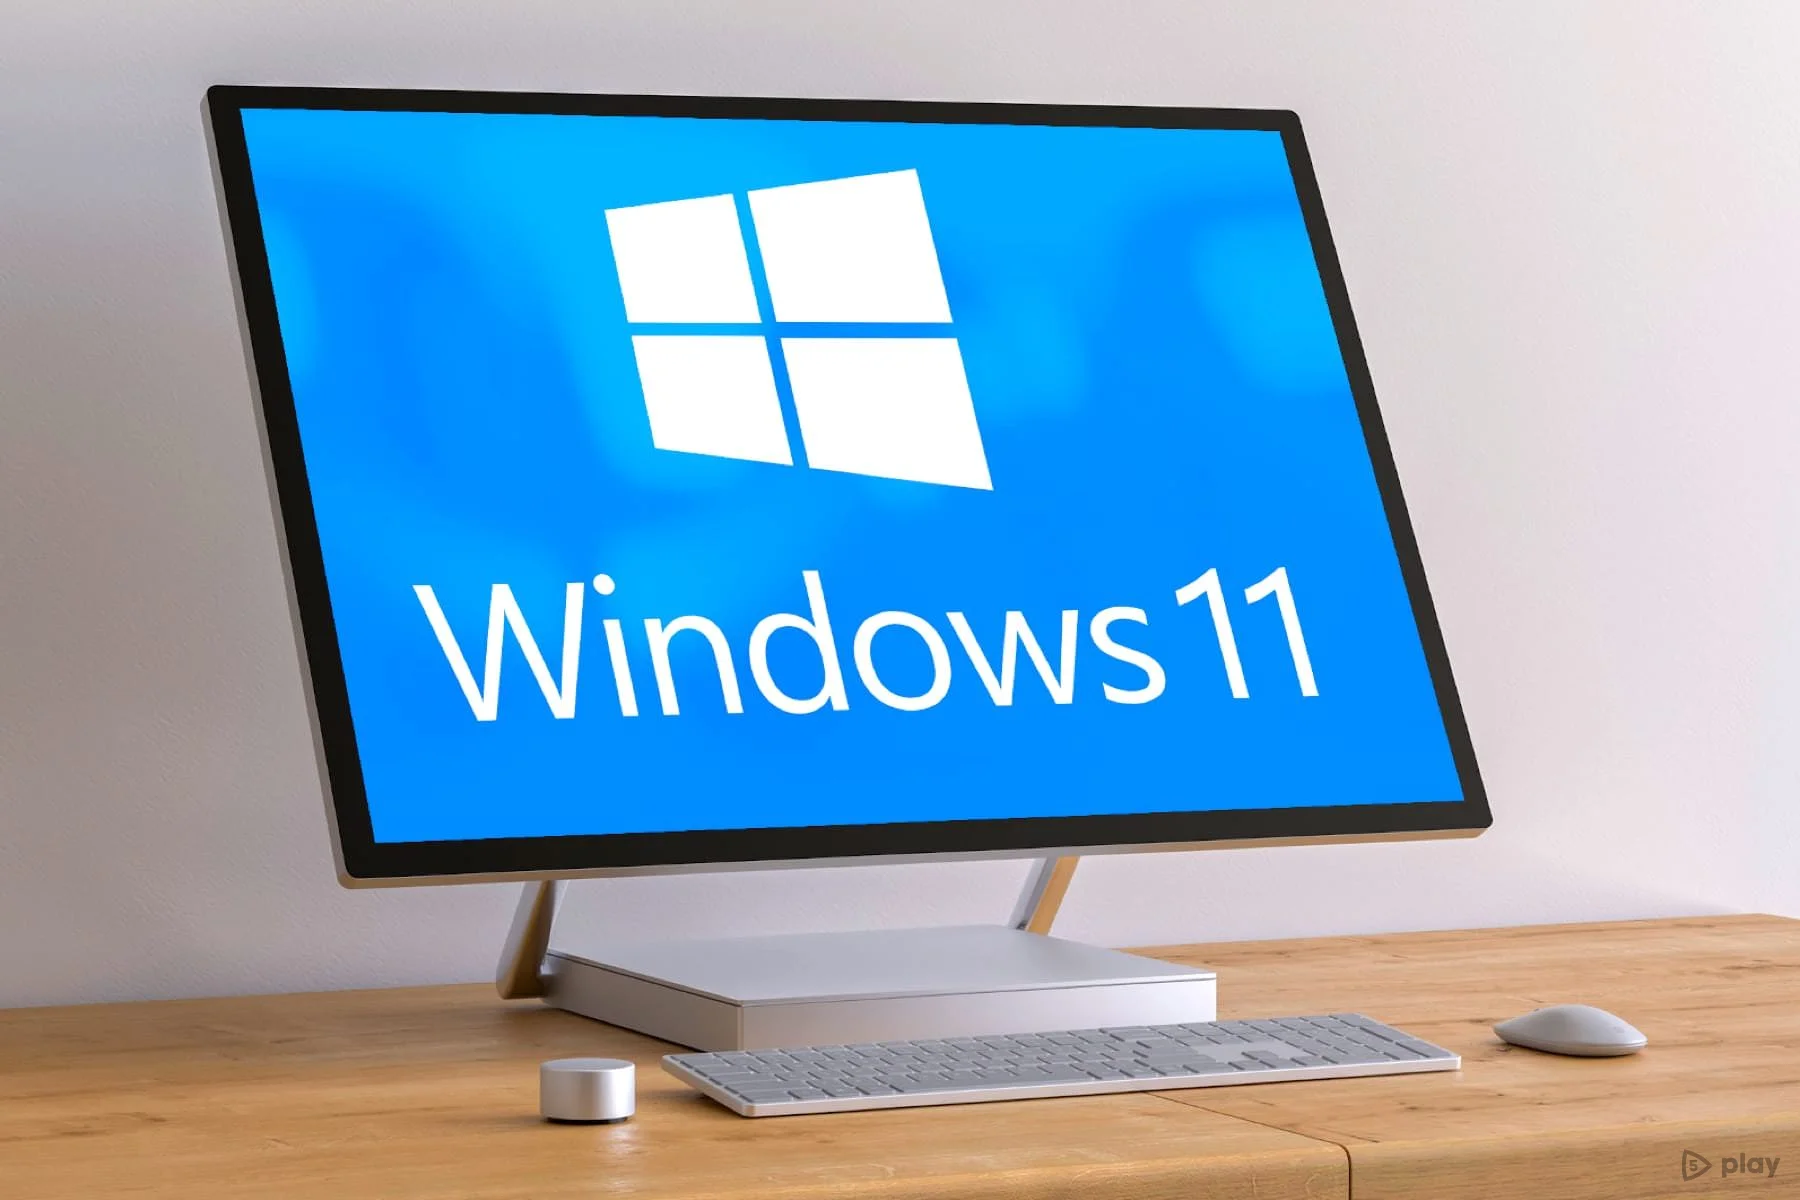 Windows 11 will get some interesting updates in February